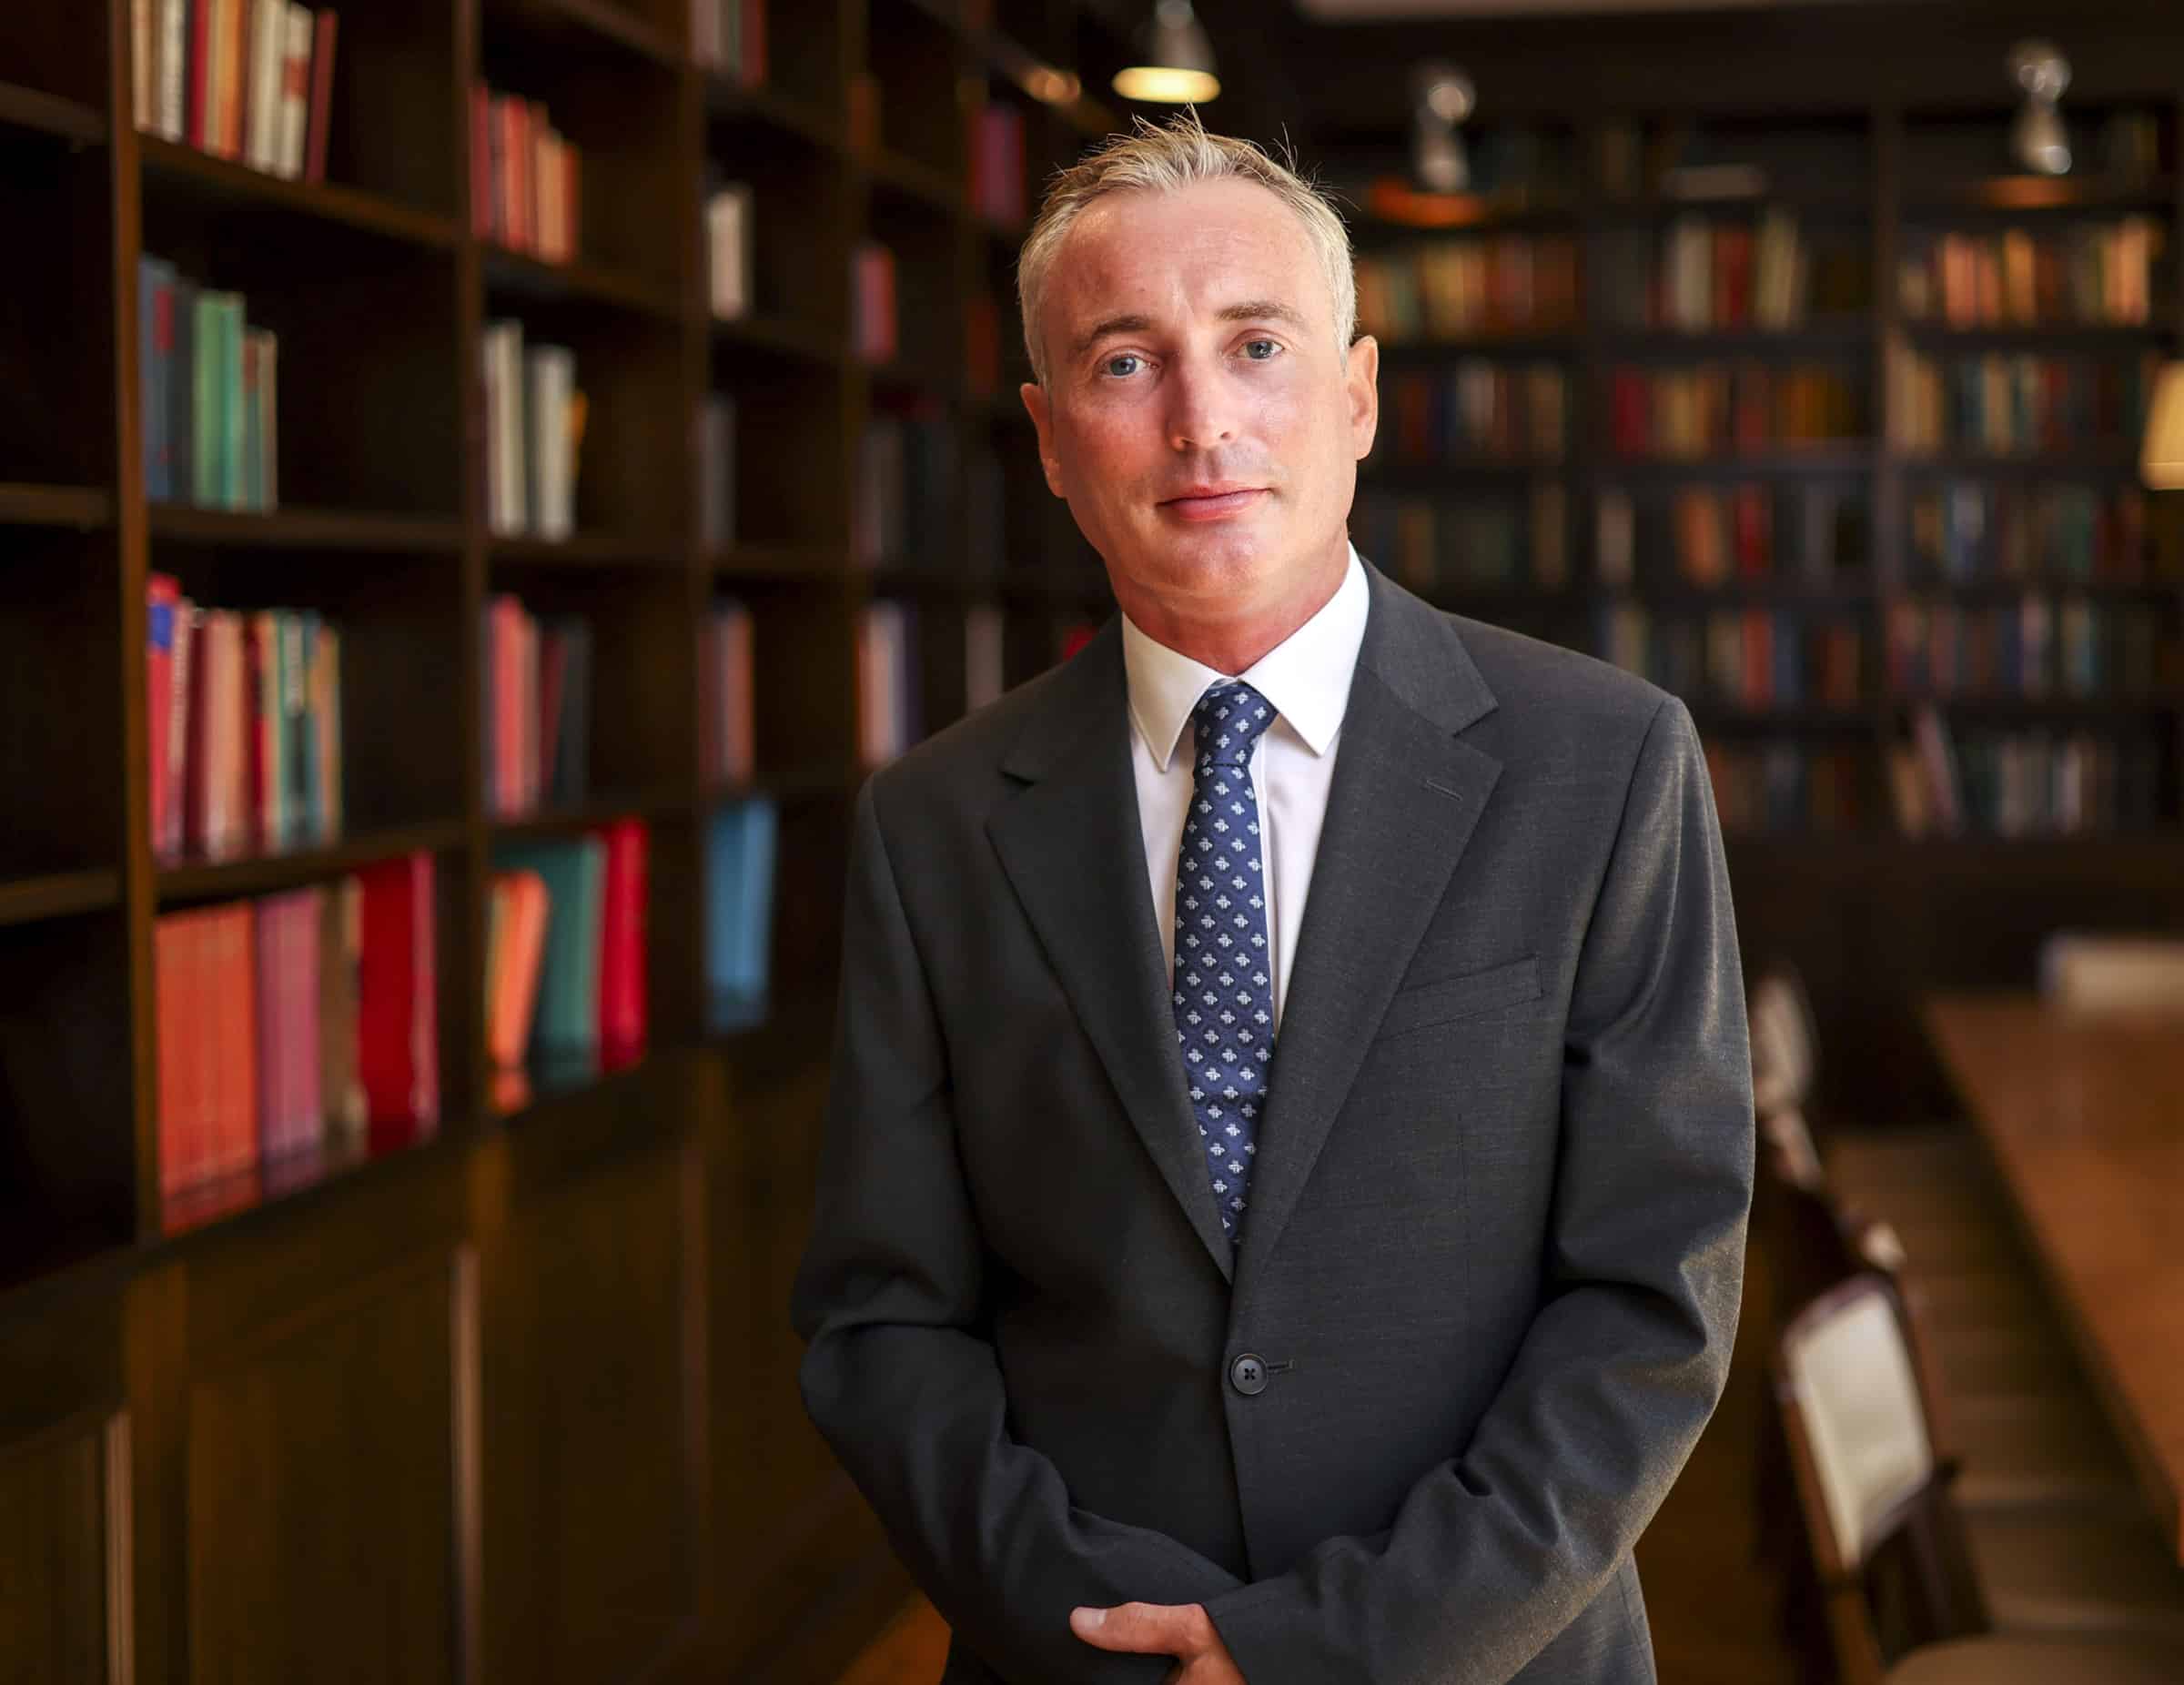 Ian Brady, Chief Executive Officer of Unio Group, standing in a professional setting with a background of bookshelves filled with colorful books. He is dressed in a dark grey suit with a white shirt and blue patterned tie, looking directly at the camera with a confident and composed expression, symbolizing his leadership and expertise in the financial services industry.